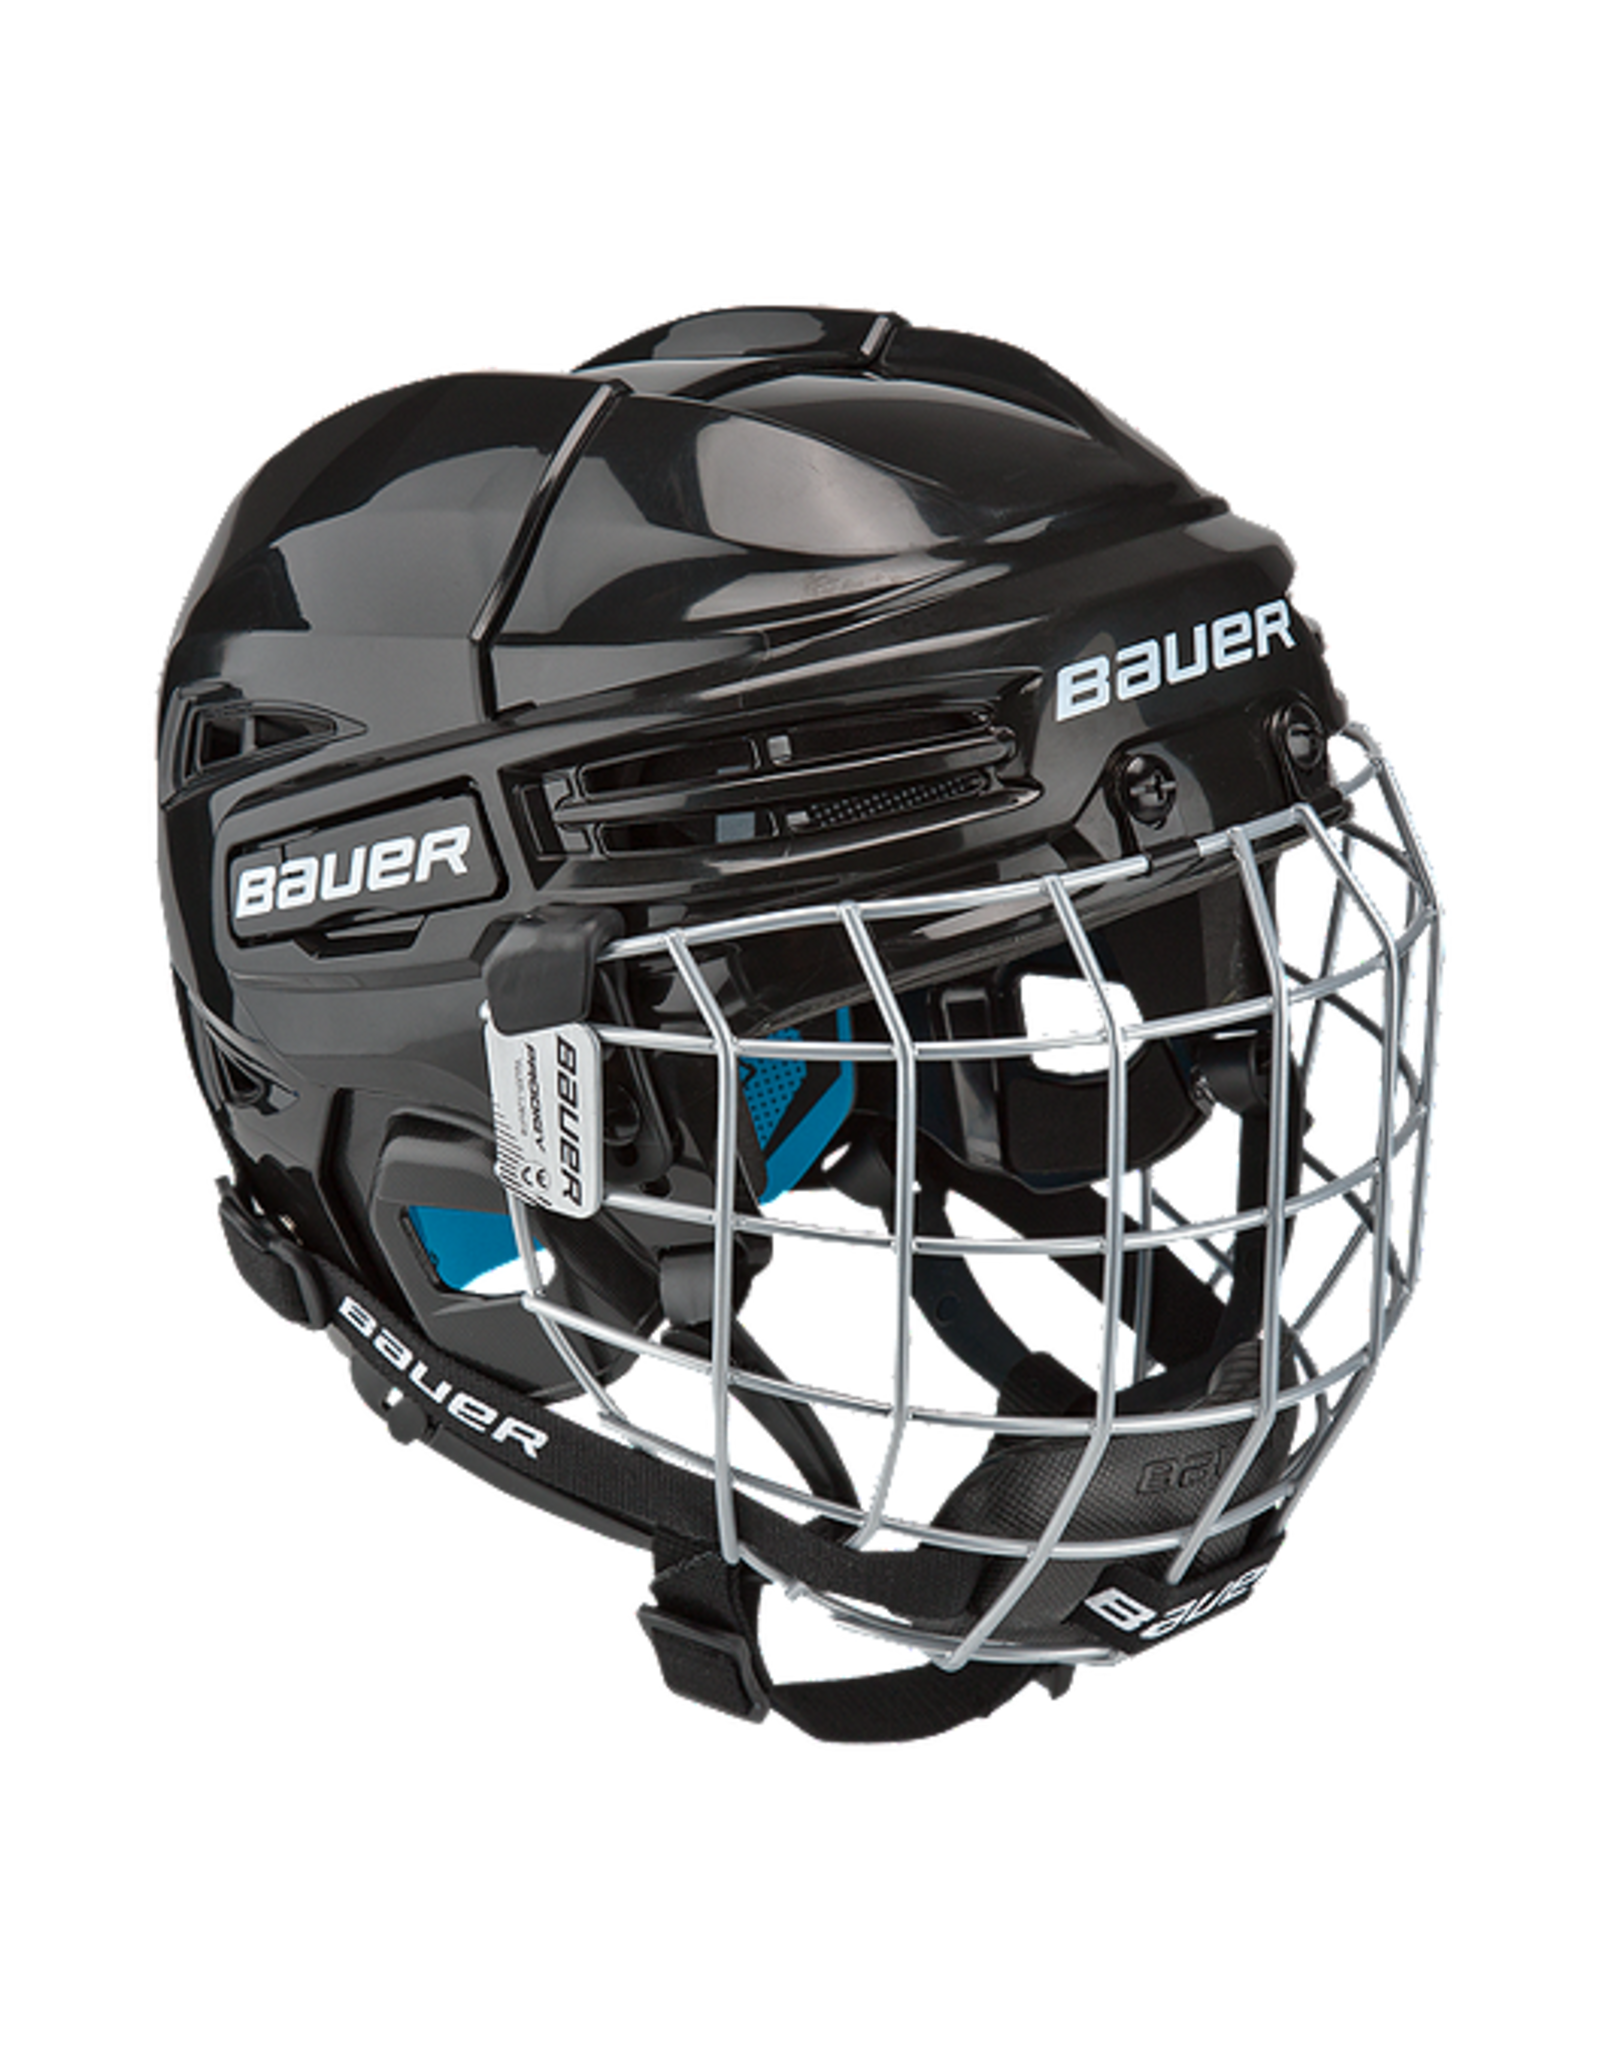 BAUER Prodigy, Youth, Hockey Helmet with Cage